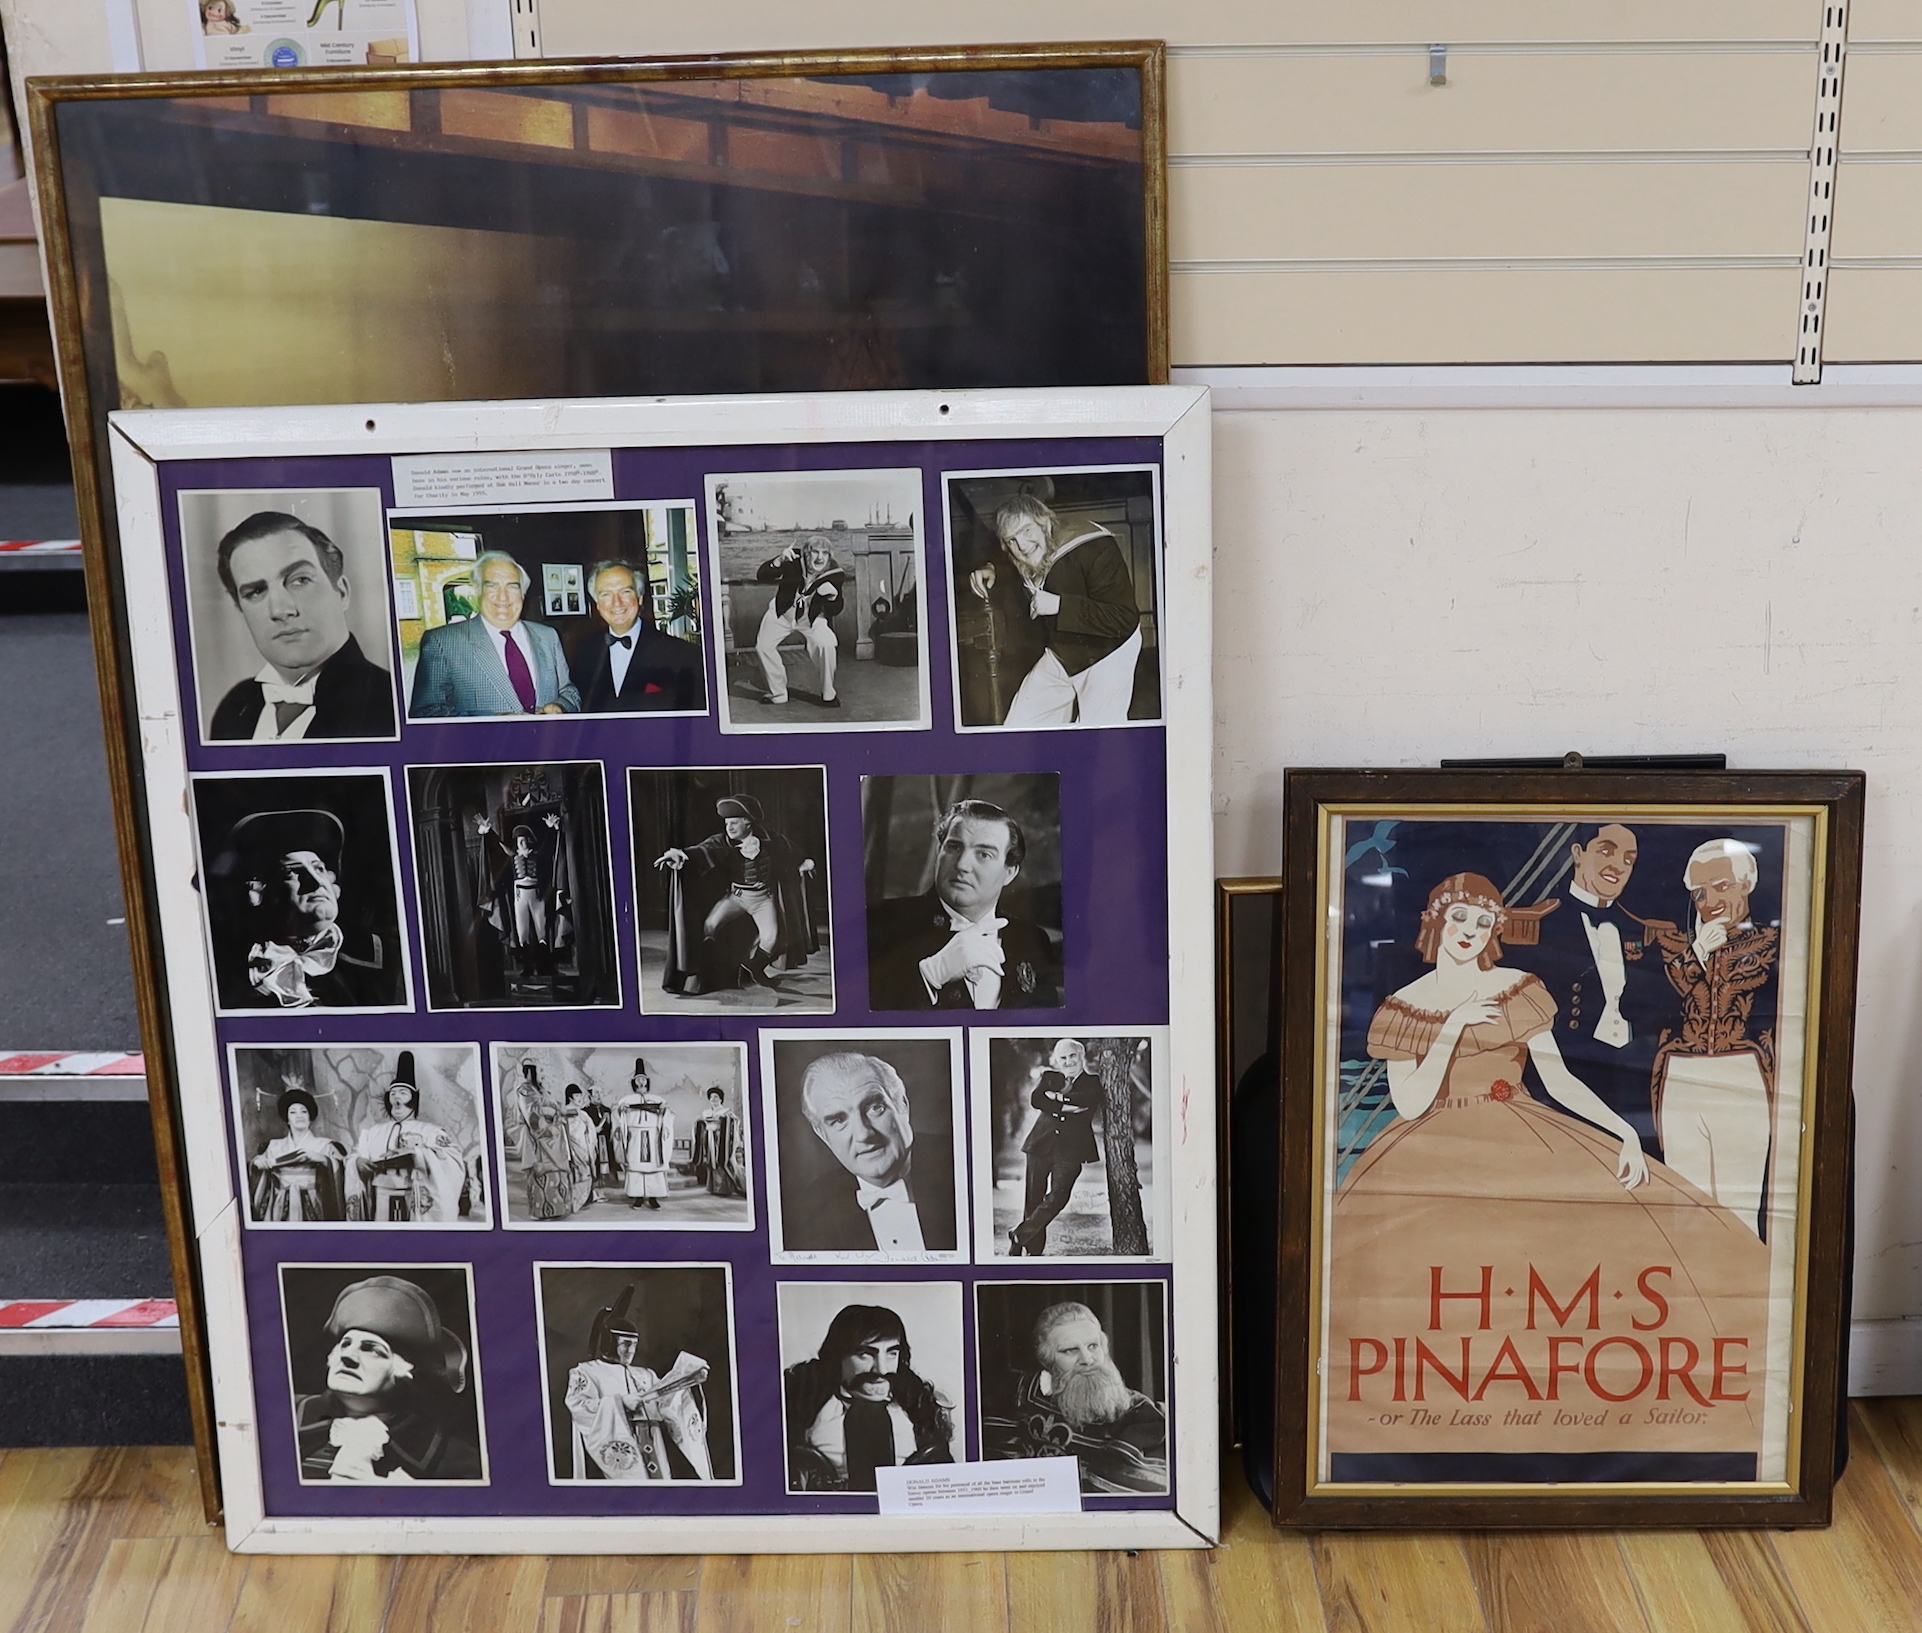 An early 20th century lithograph poster for Gilbert & Sullivan’s H.M.S. Pinafore, in an oak frame, together with a framed play bill, another framed poster, a large framed production photograph and a framed photo montage